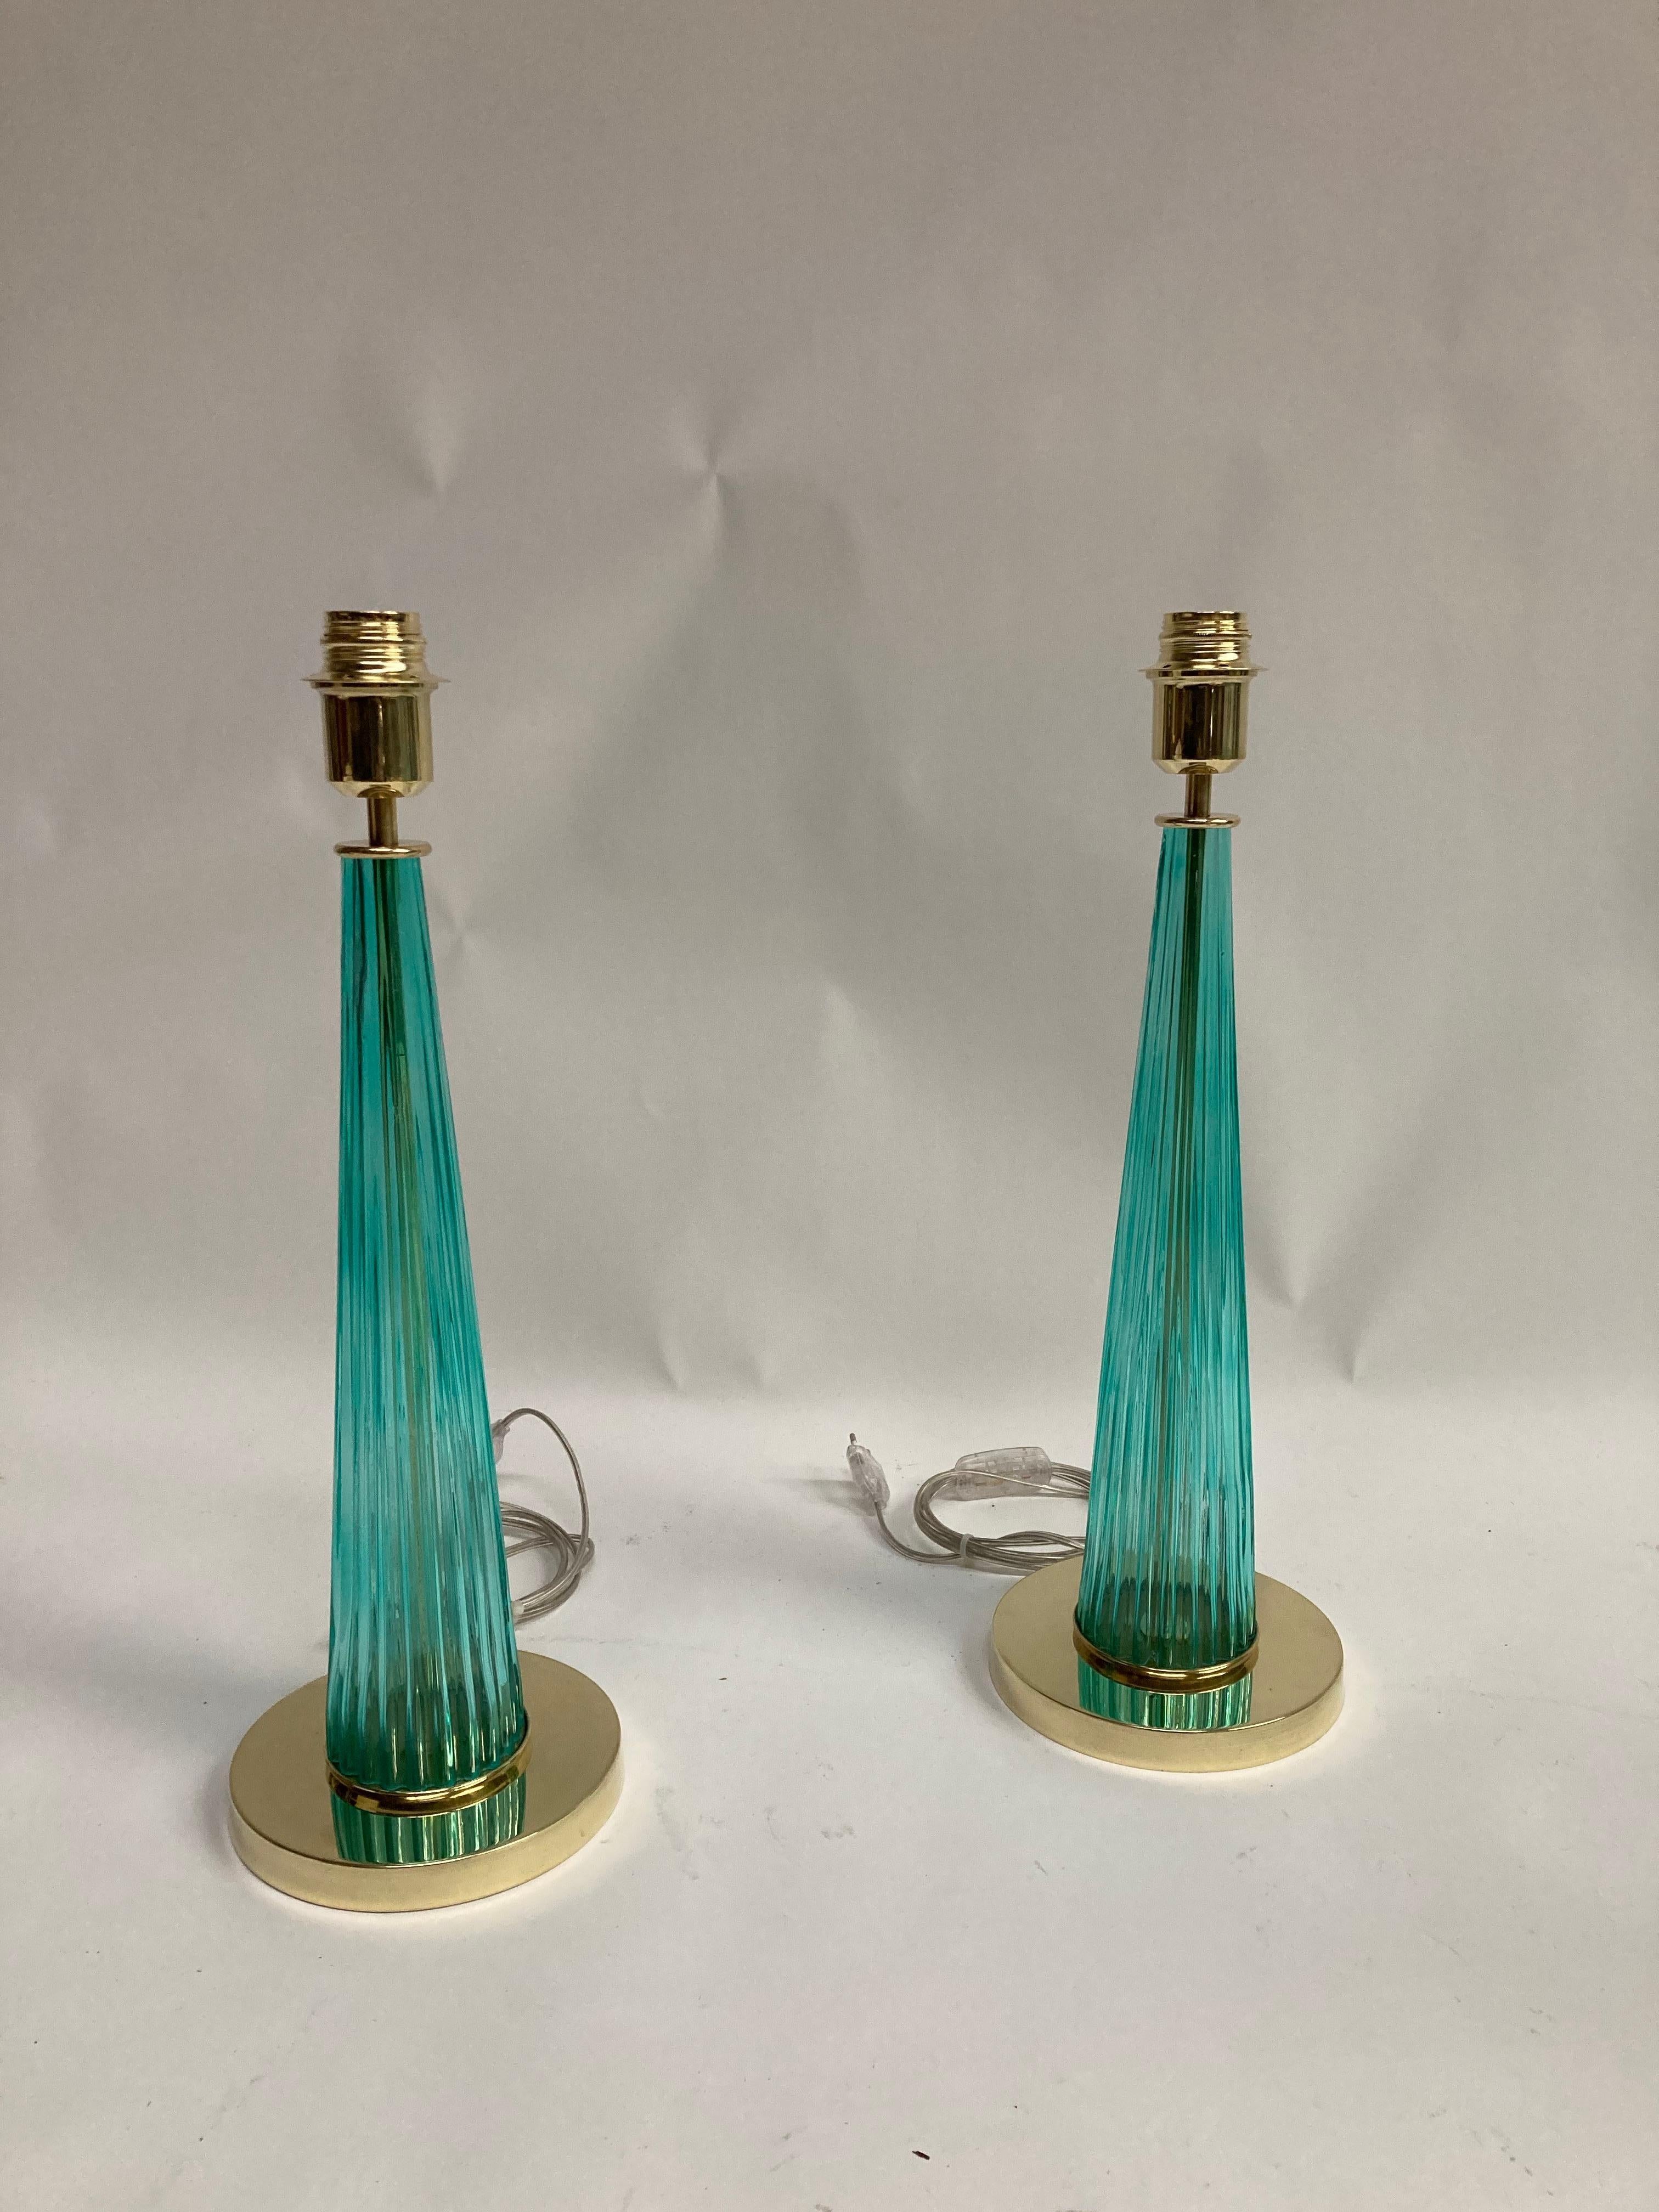 Pair of classic glass lamps
with an amazing colour.